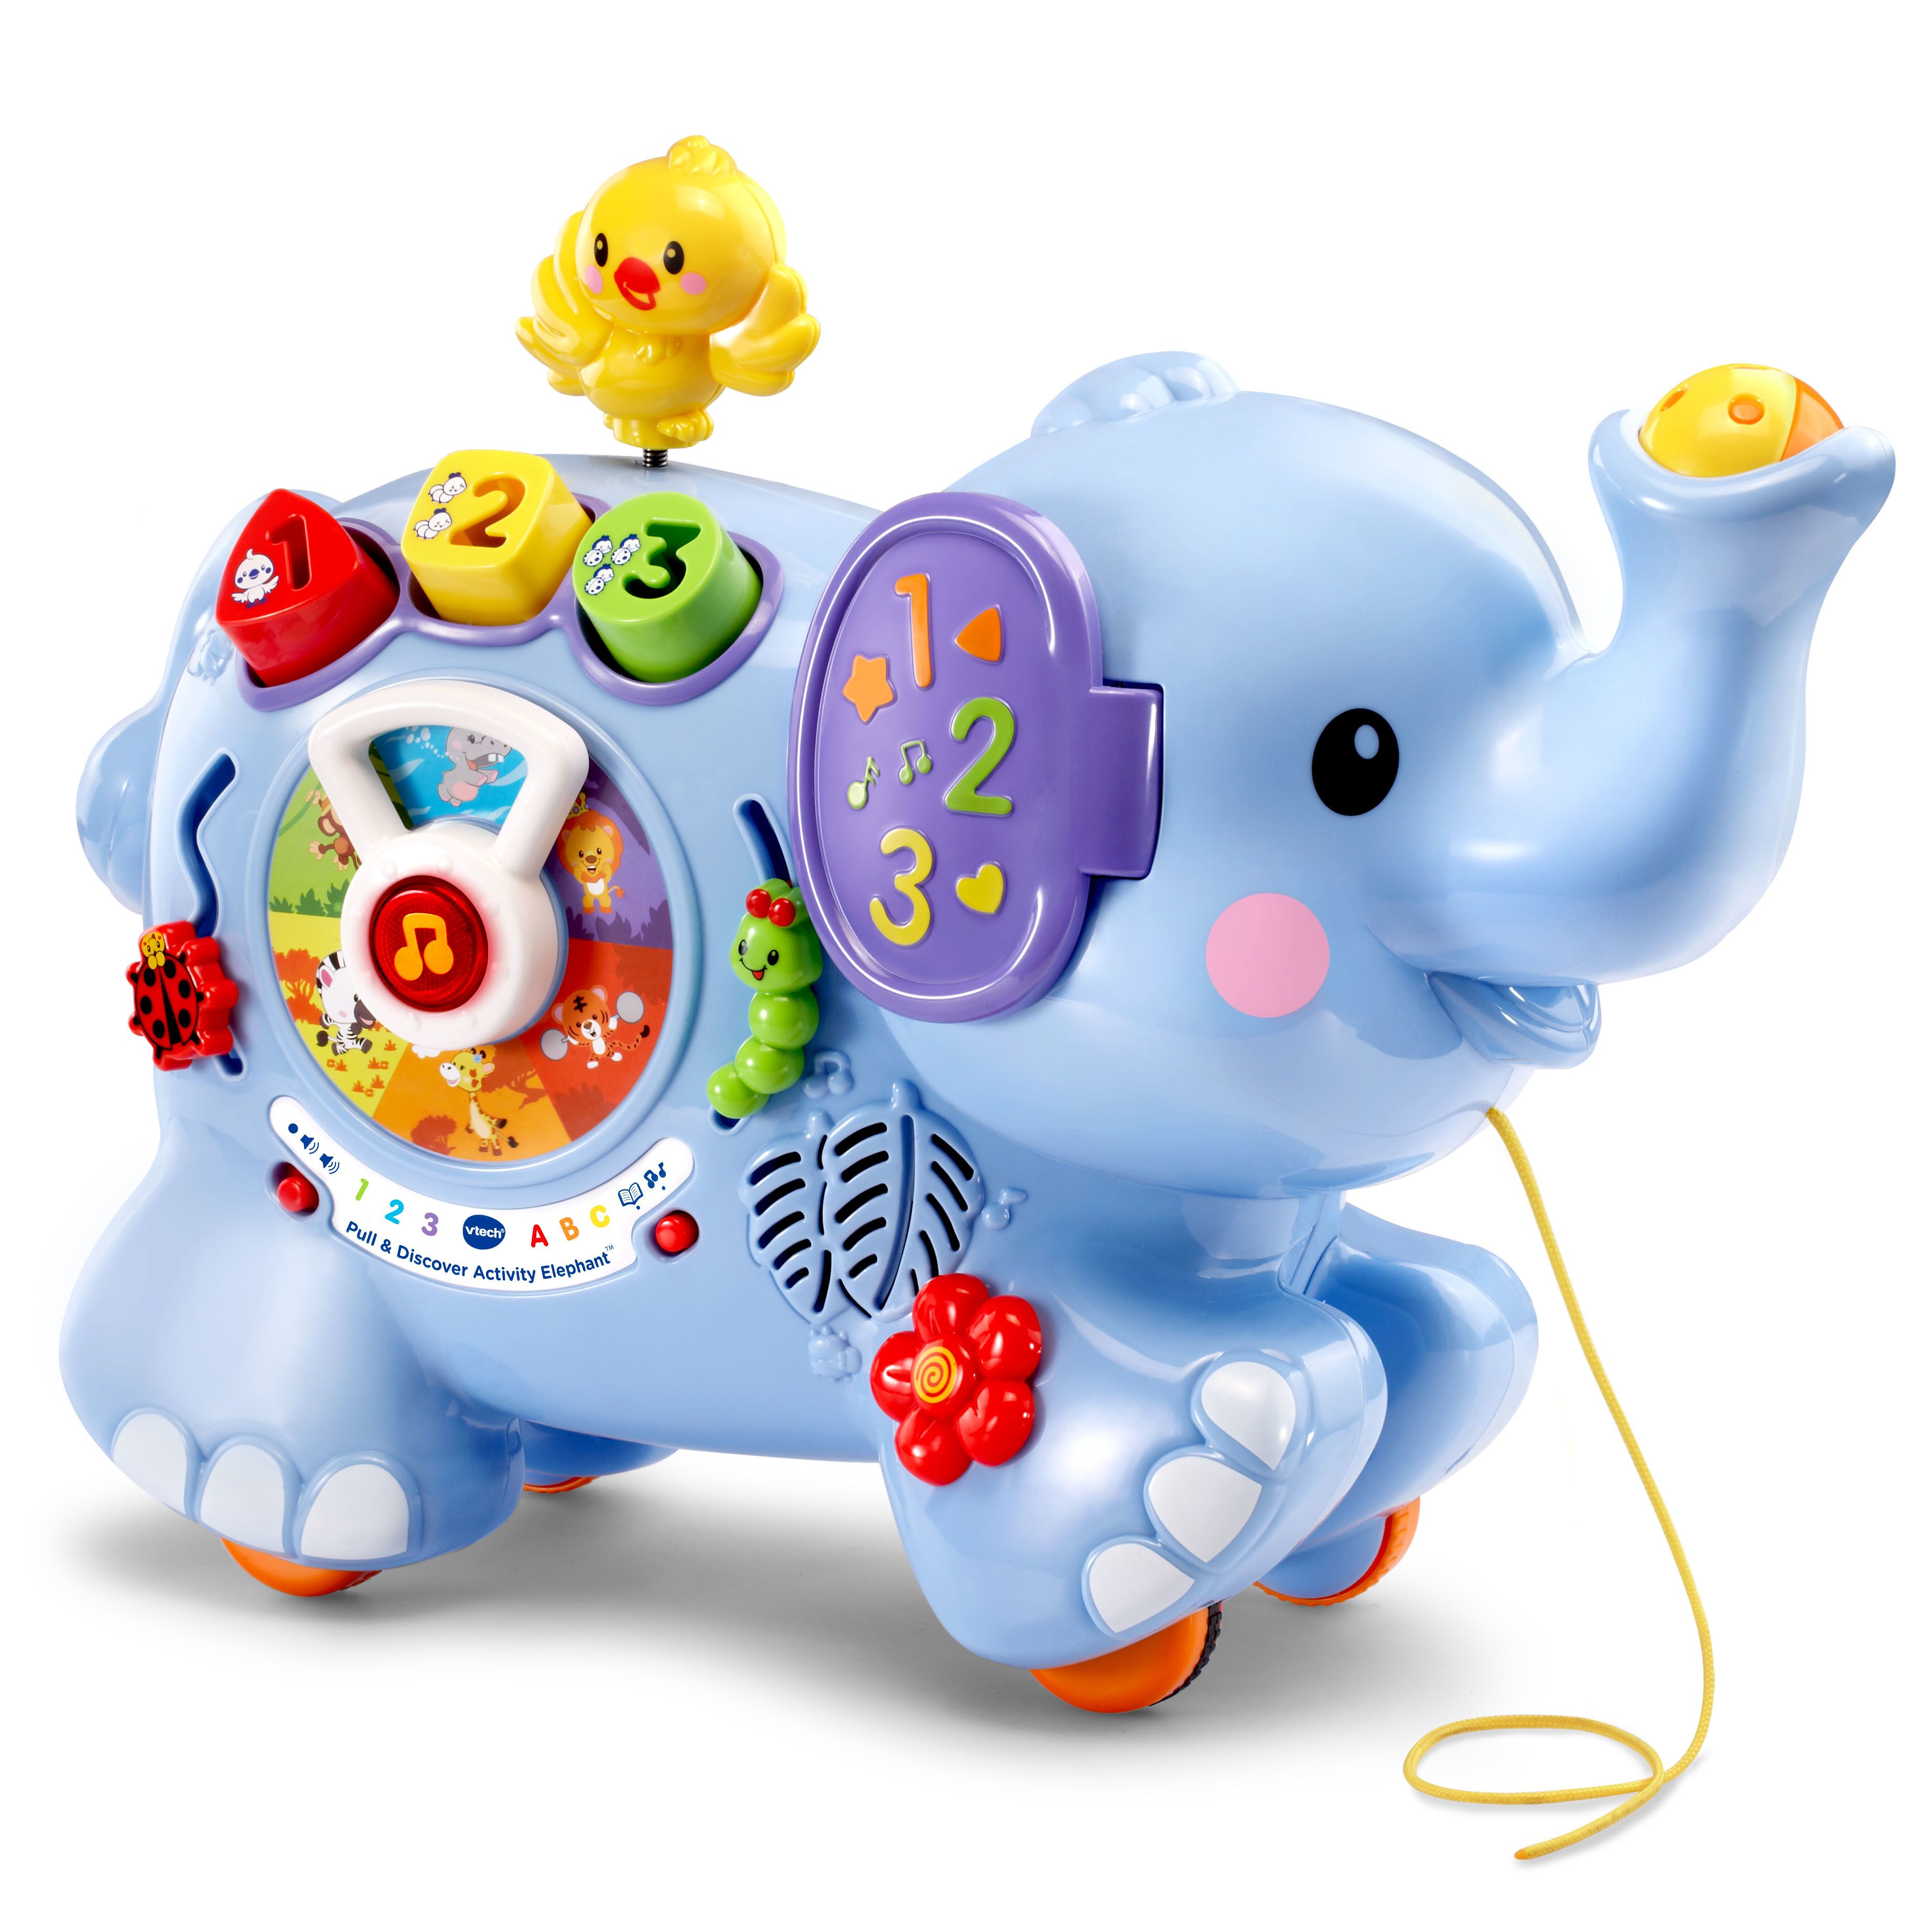 Pull & Discover Activity Elephant by VTech